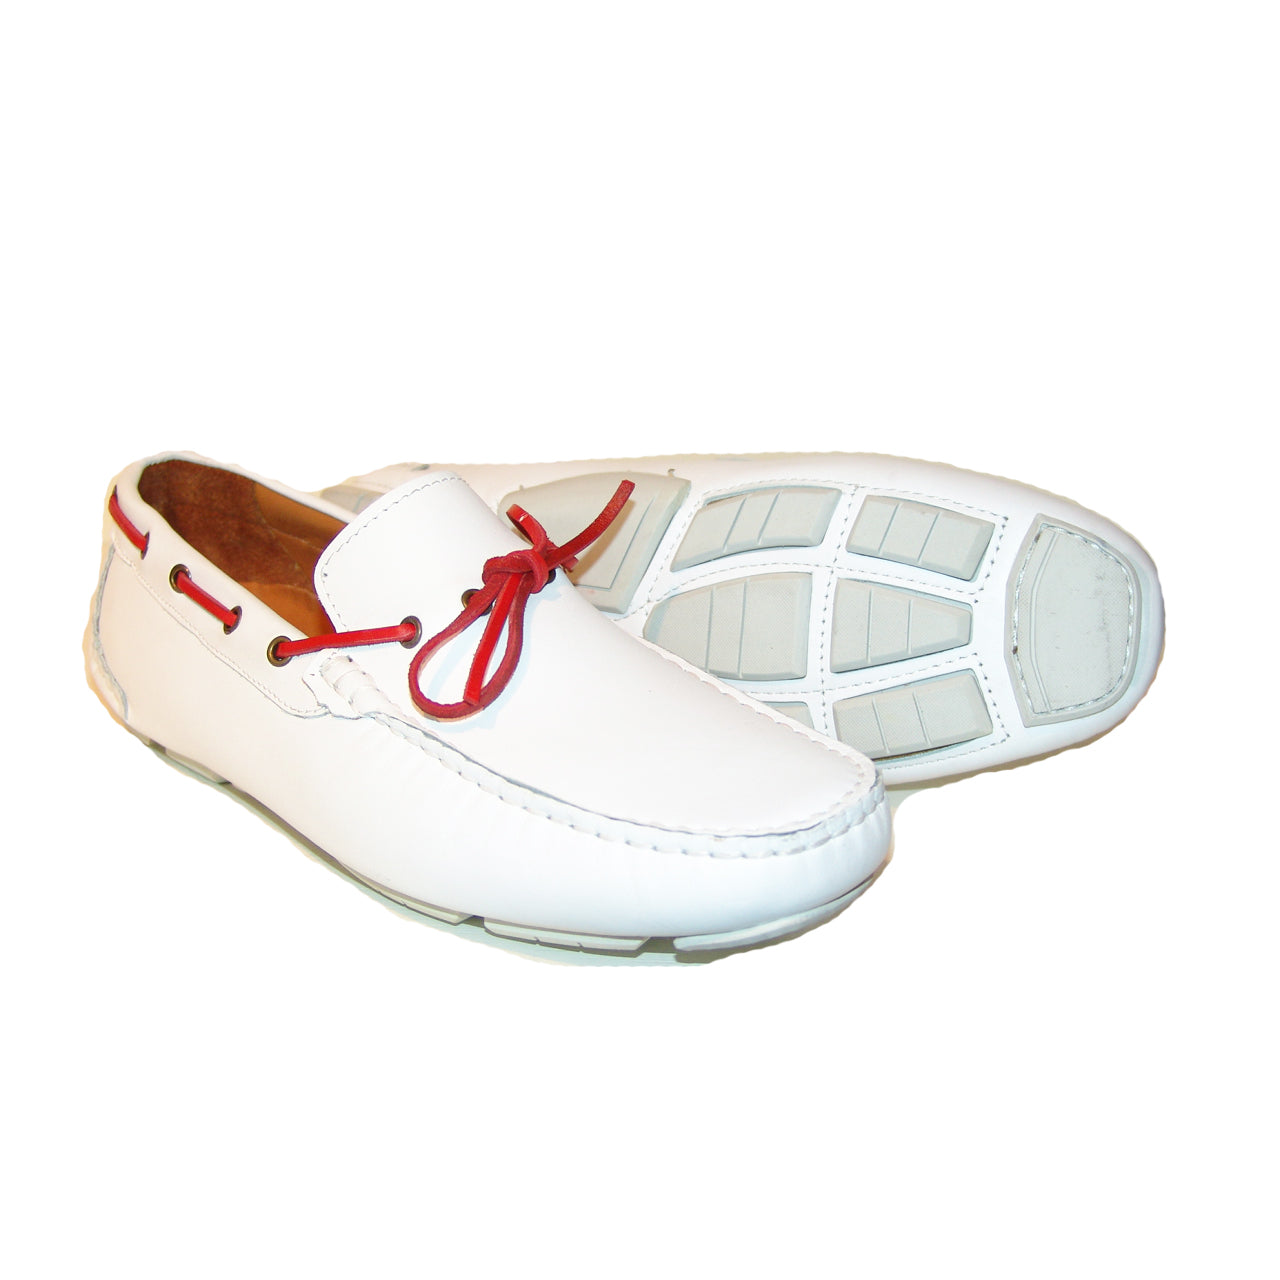 Pelle Line Exclusive 7810 Bow Driving Shoes - White/Red